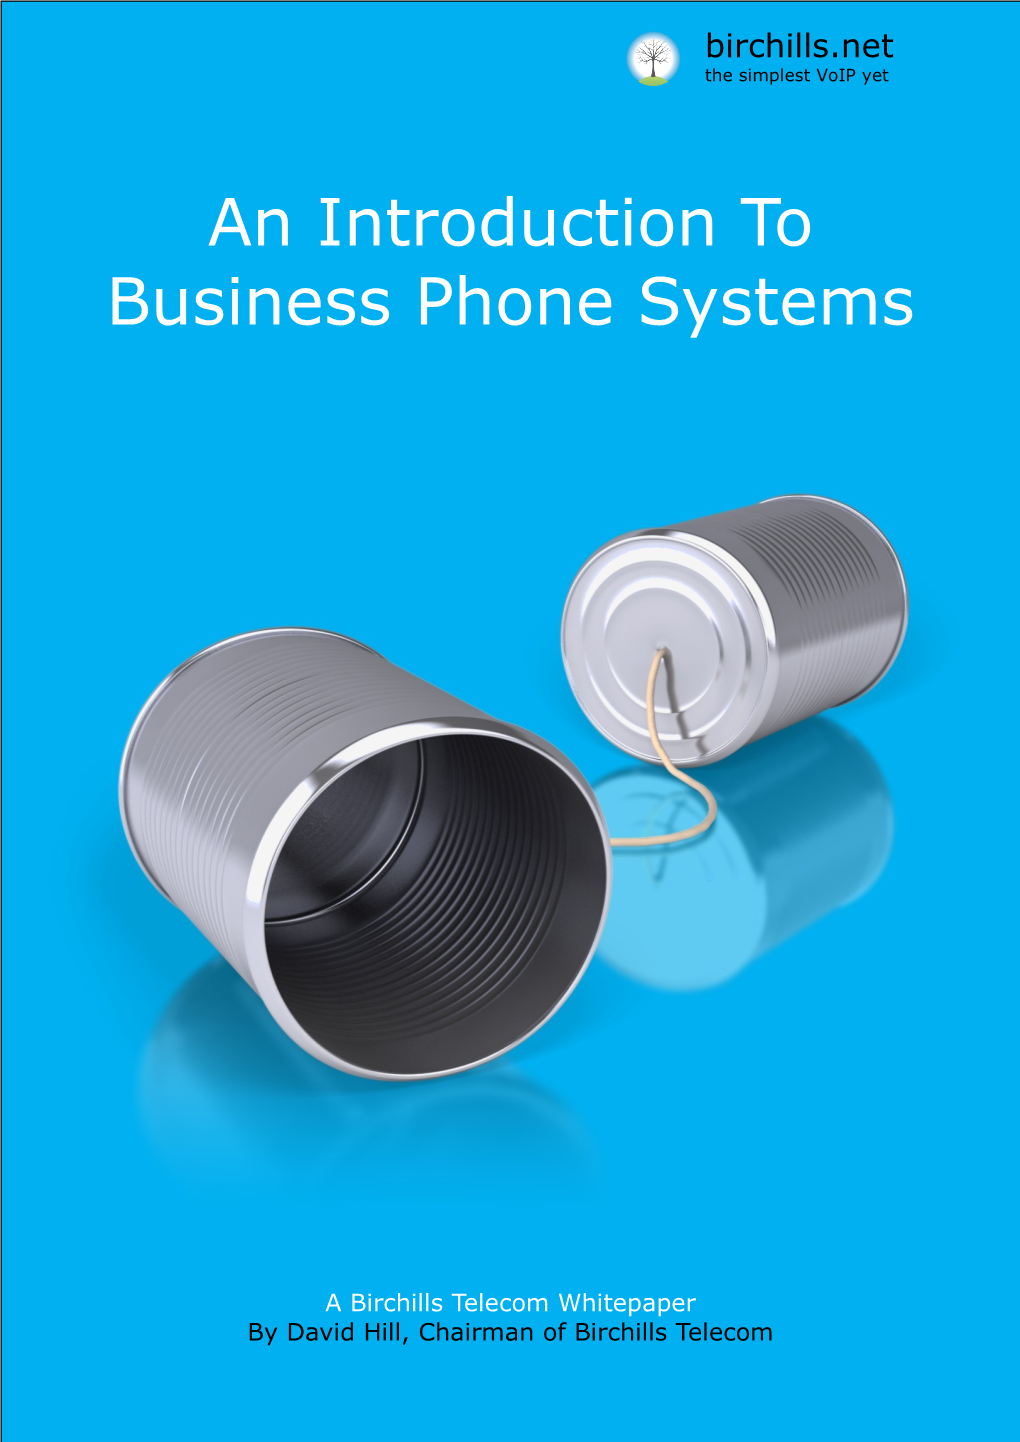 An Introduction to Business Phone Systems